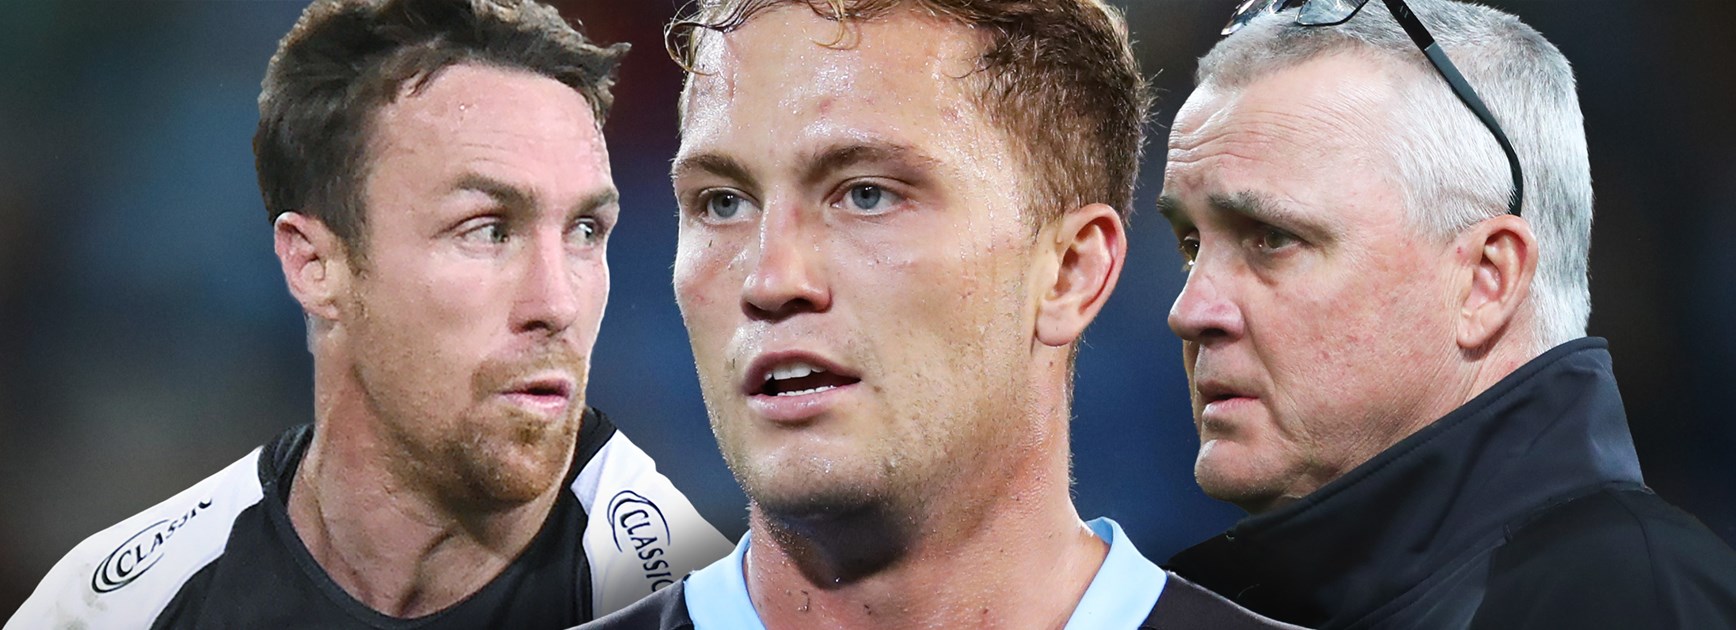 What caused Moylan's split with Panthers